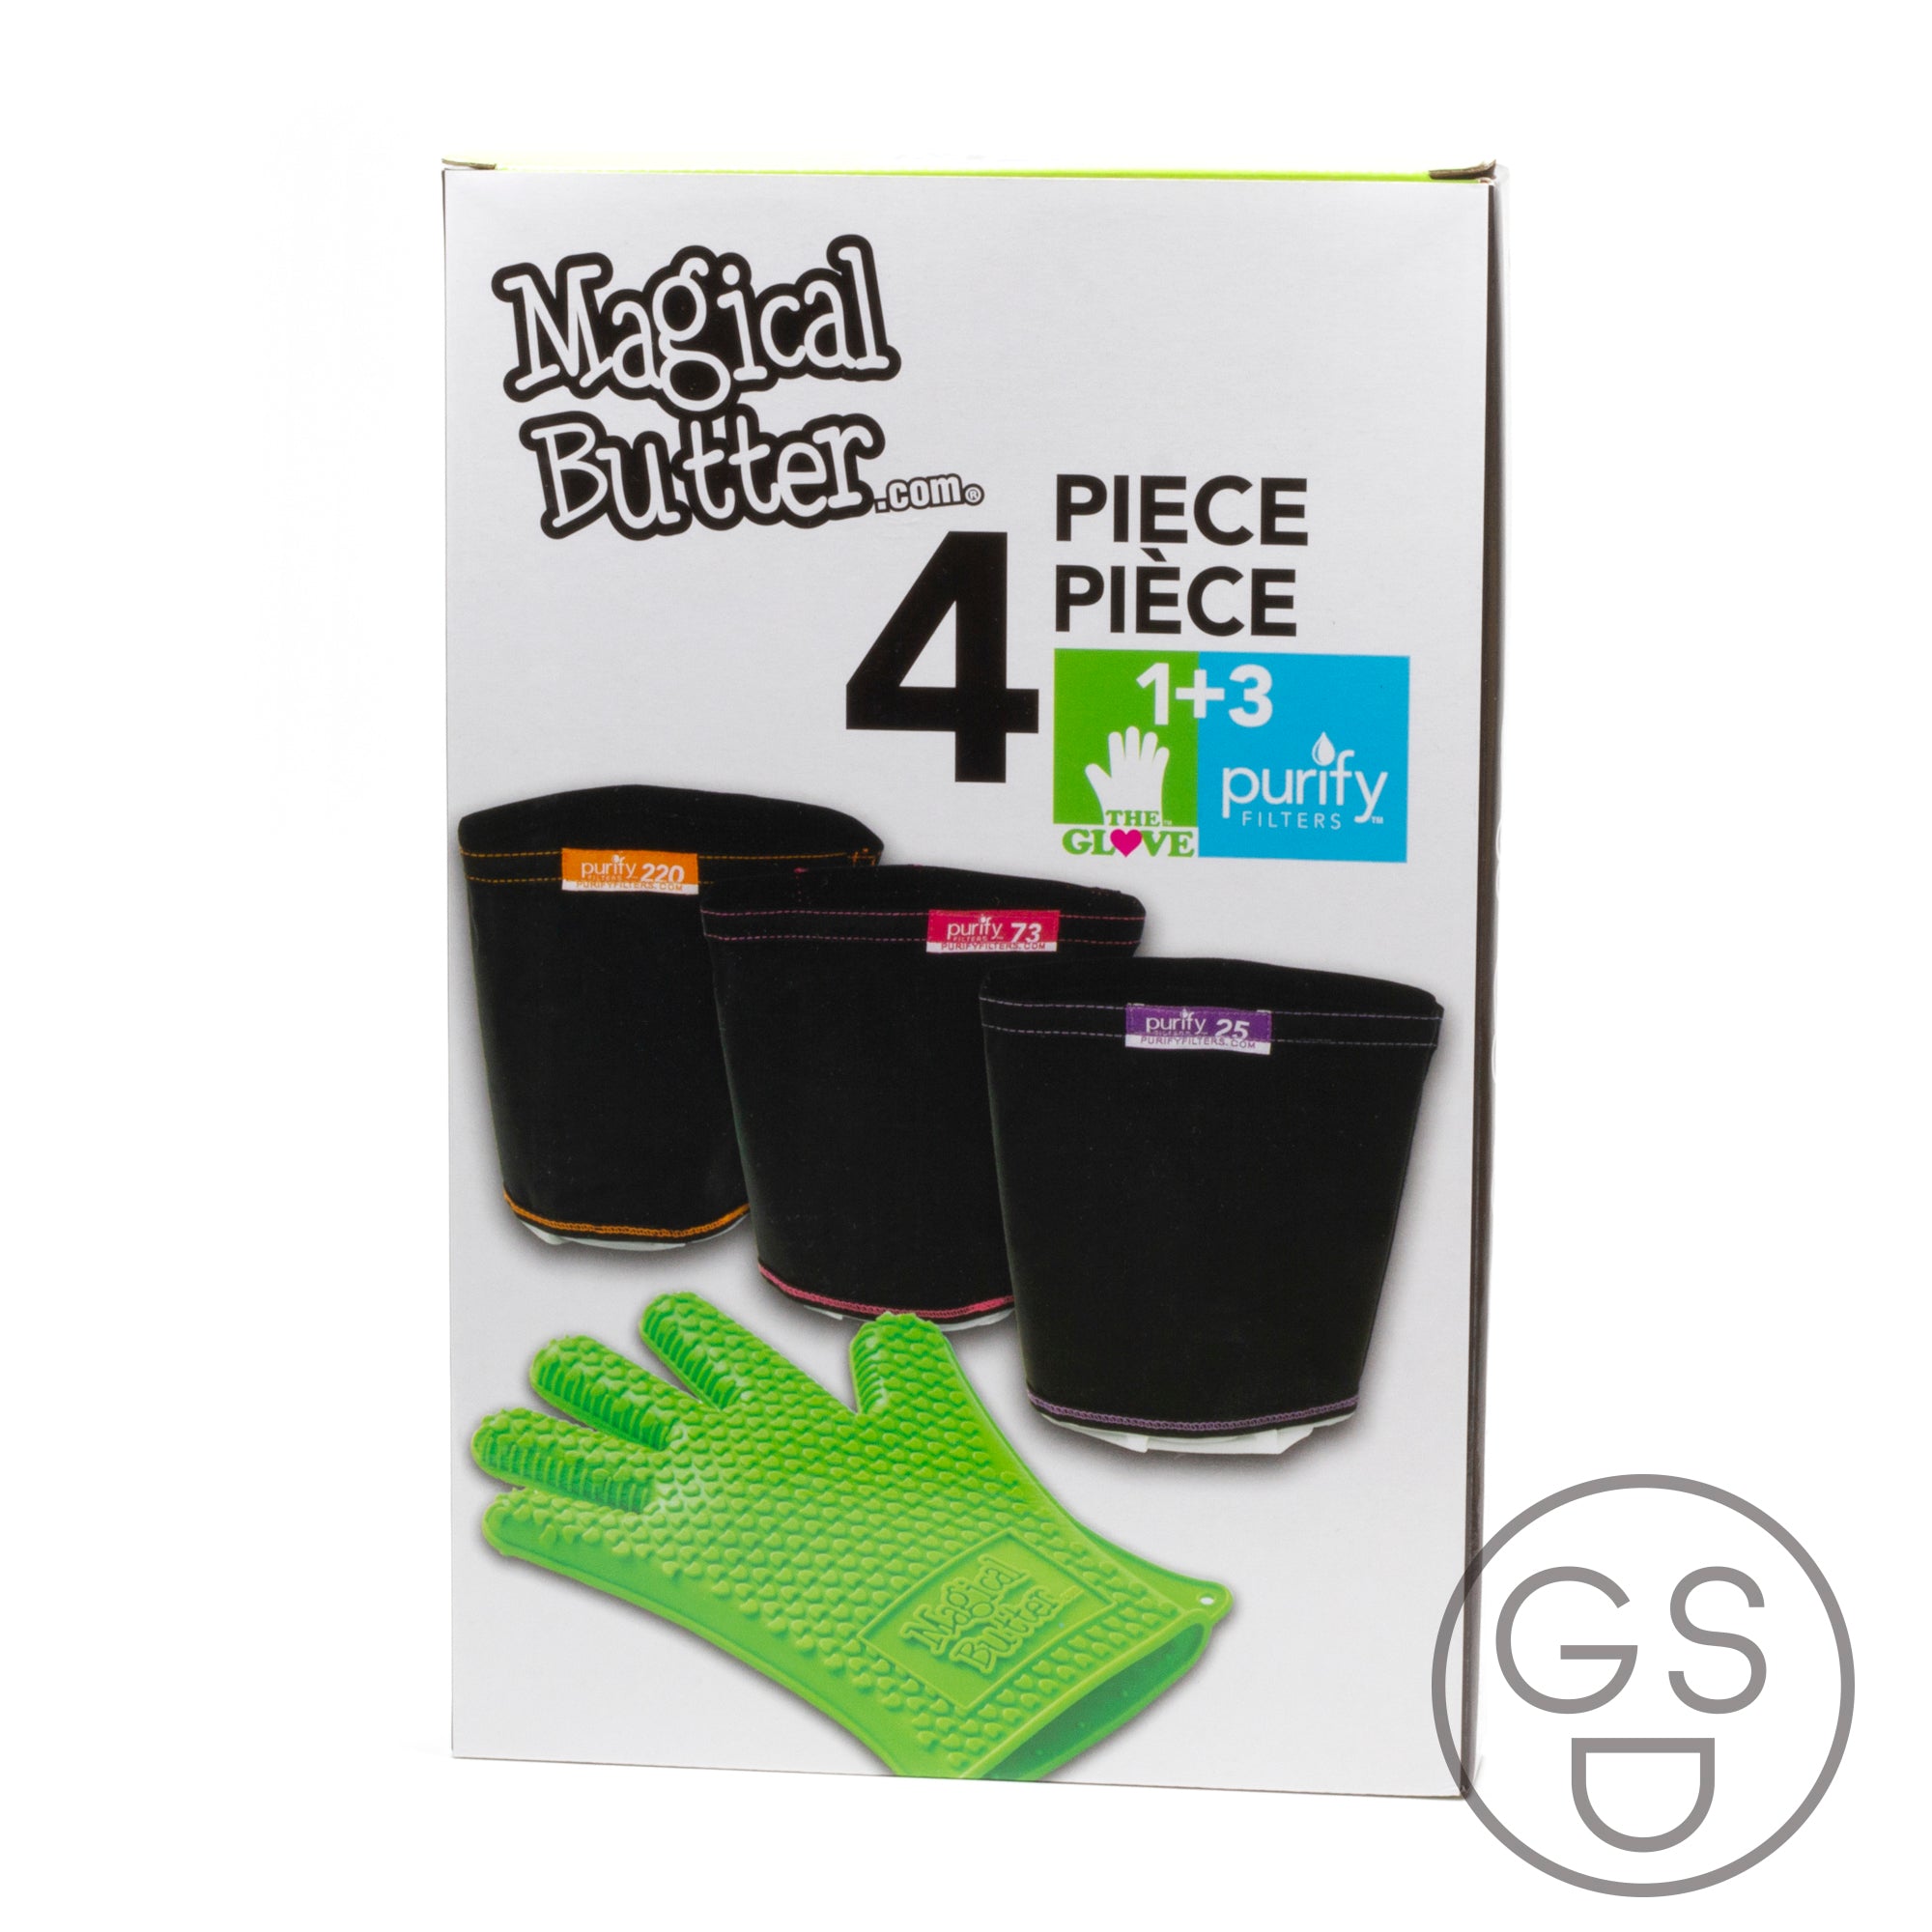 Magical Butter 4-Pack Filter Bags and Glove